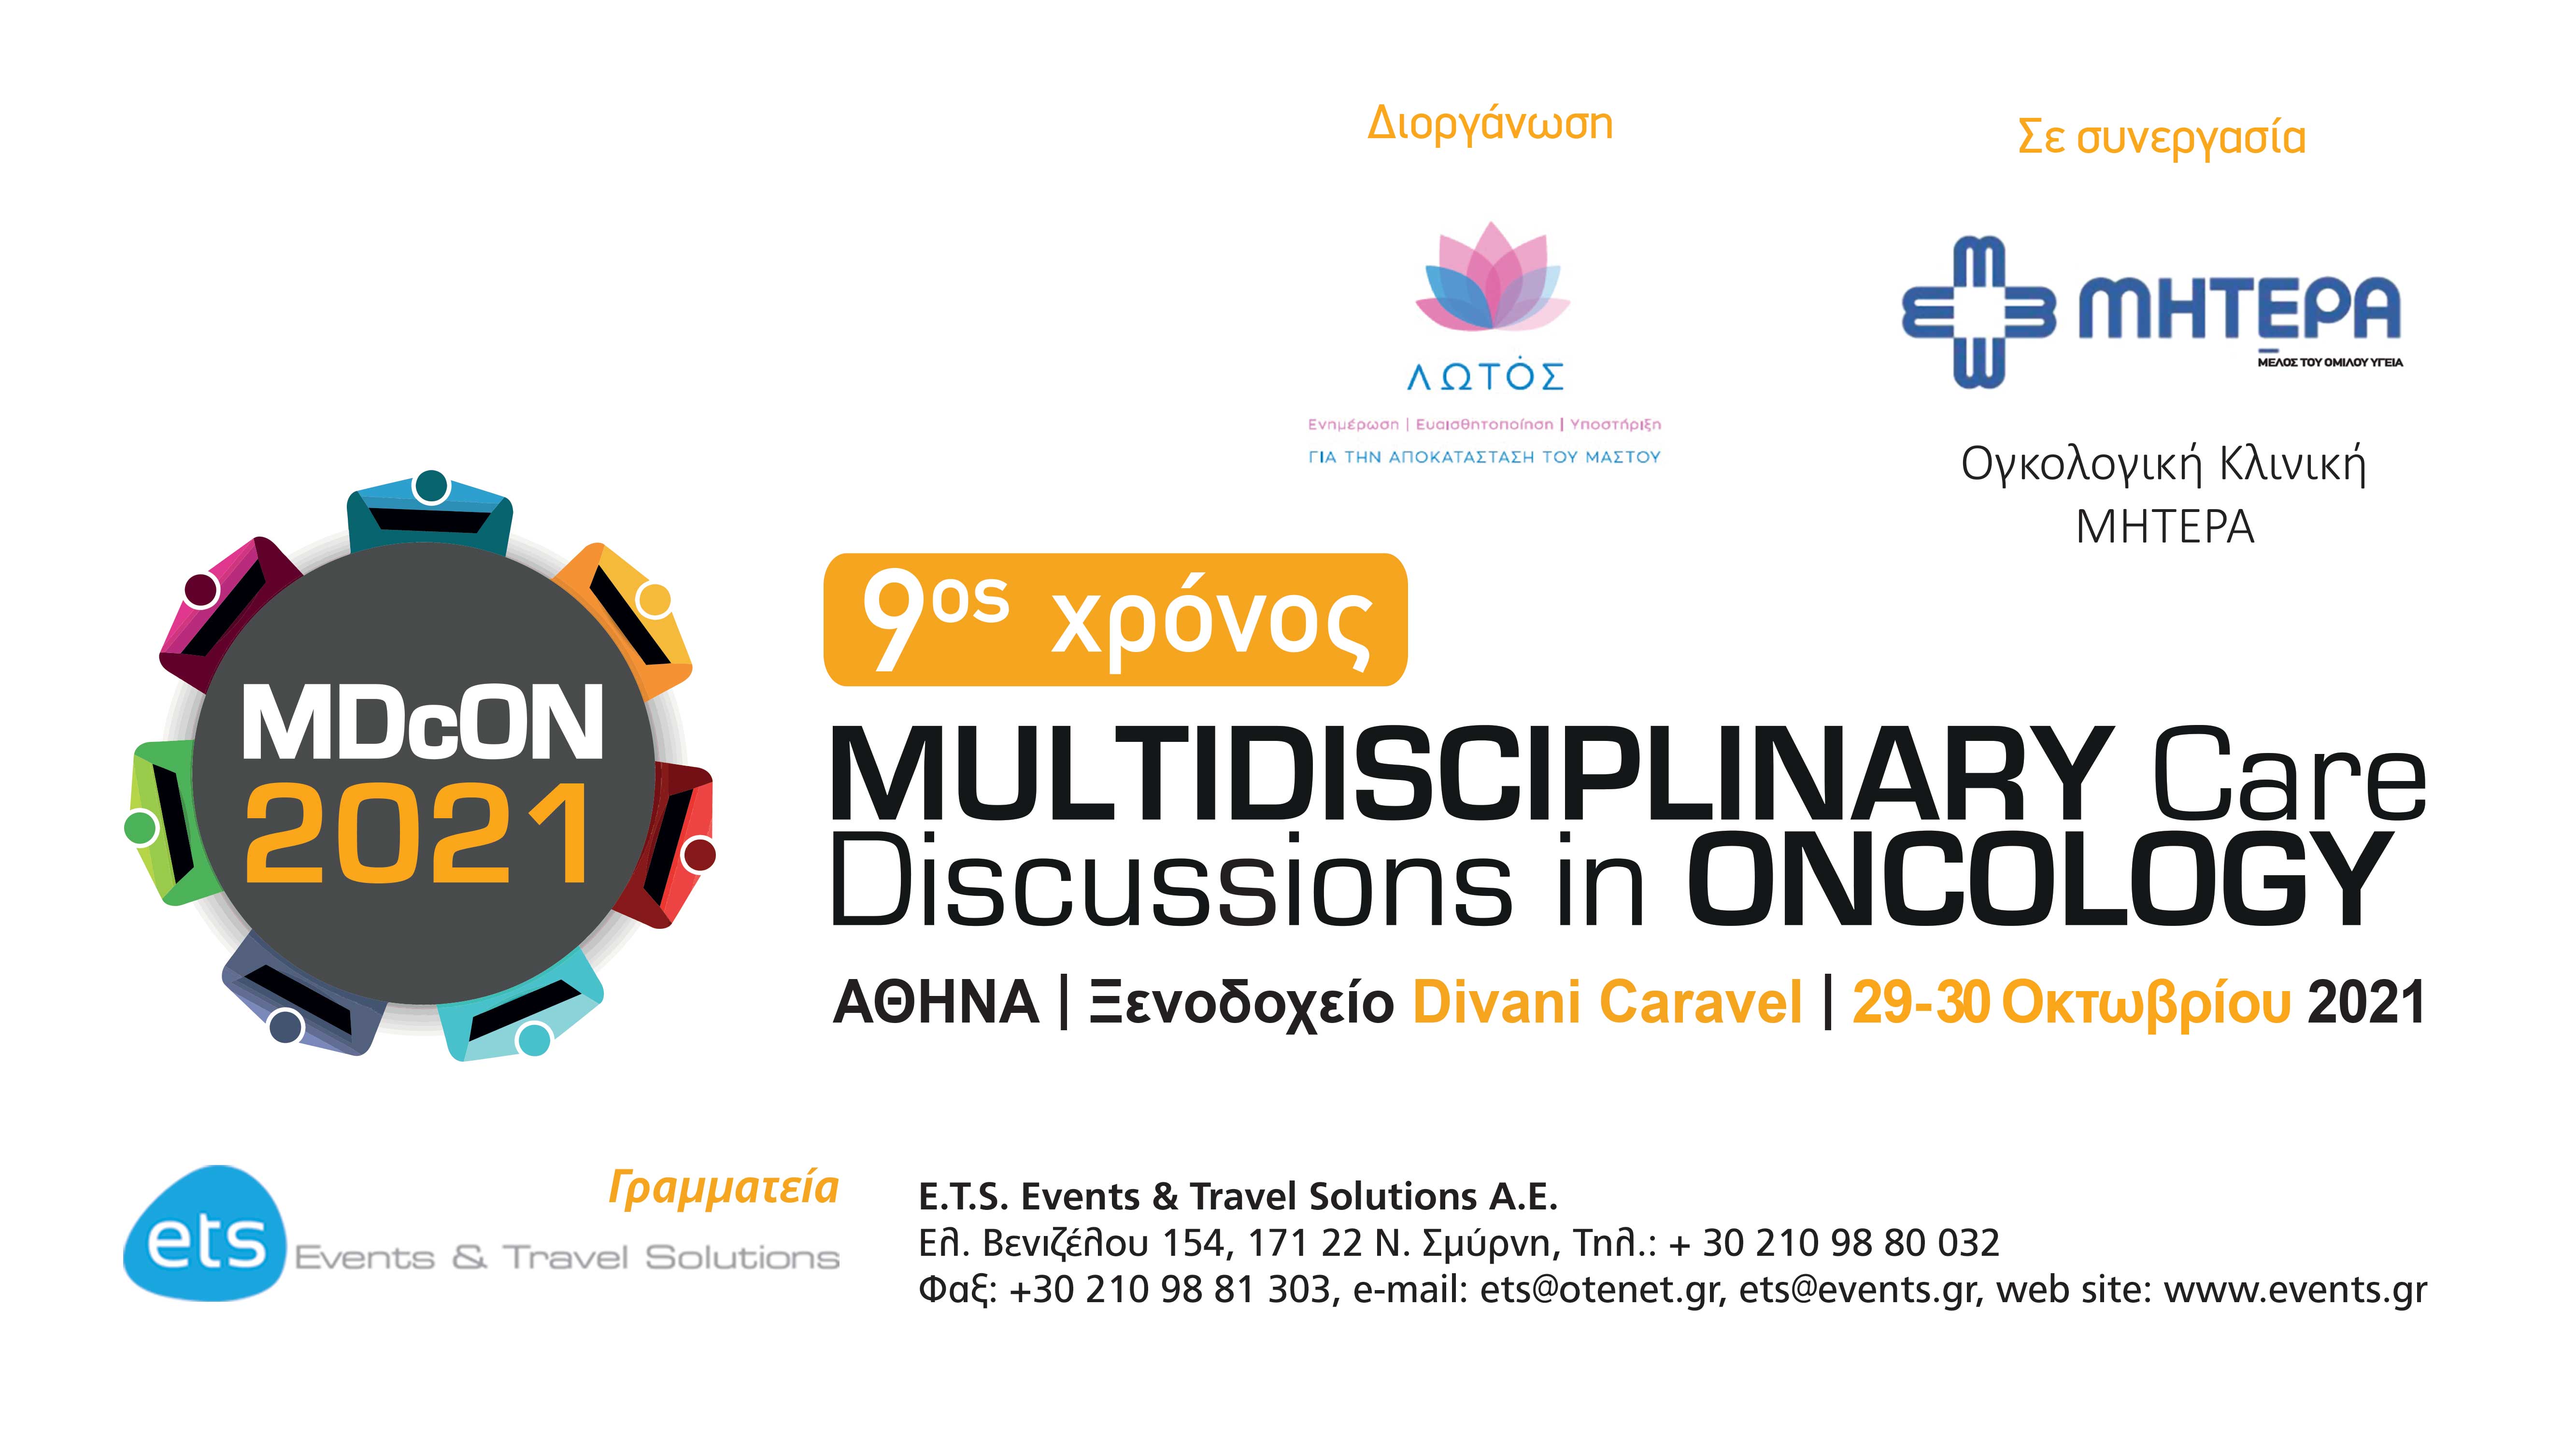 MDcON 2021 - Multidisciplinary Care Discussions in Oncology